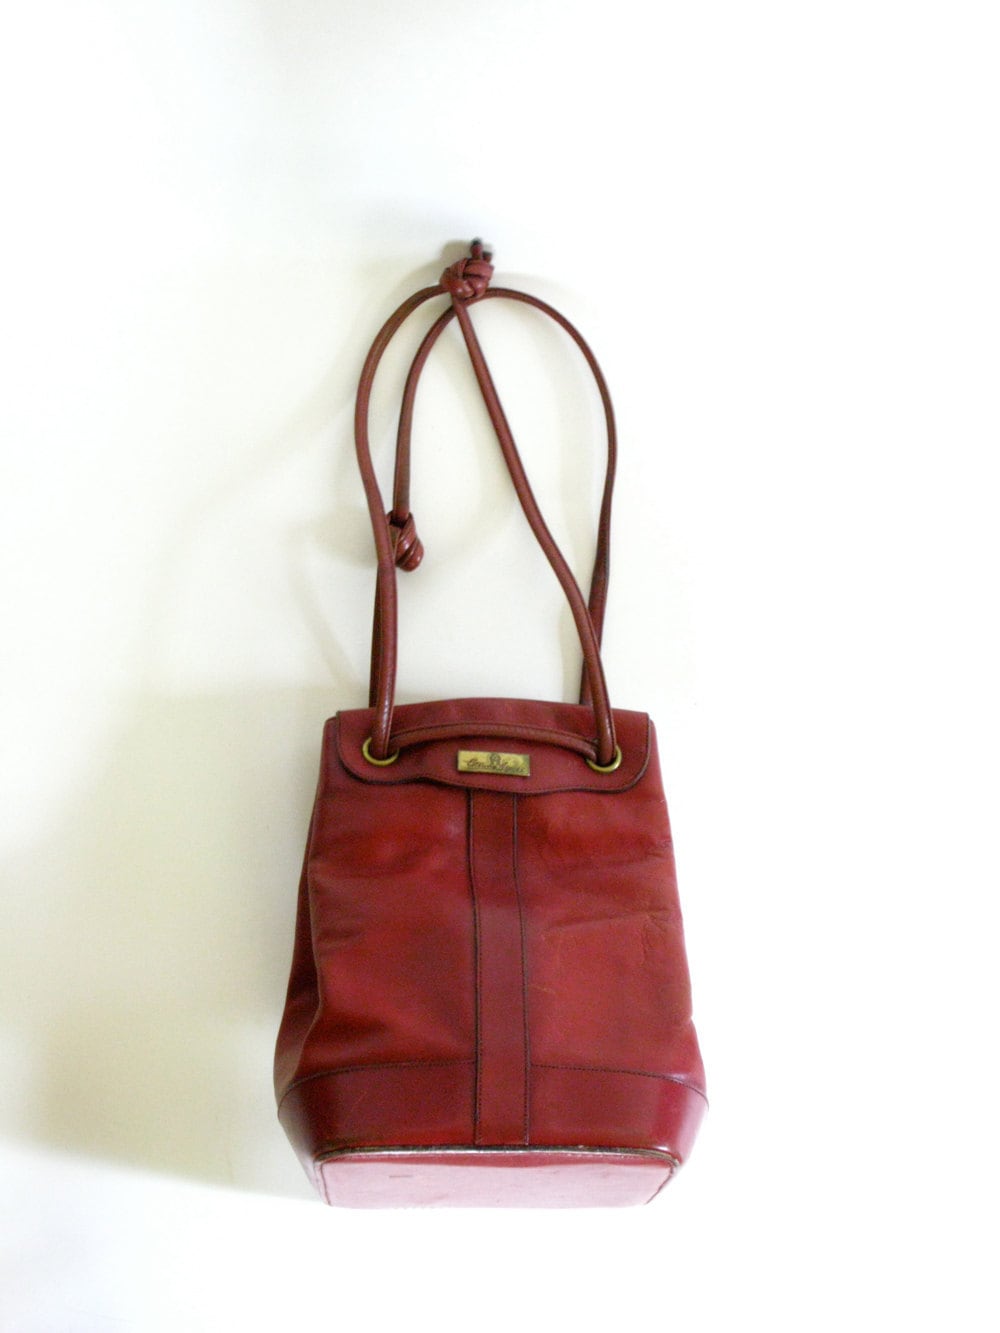 Etienne Aigner Purse / Red Leather Bucket Bag